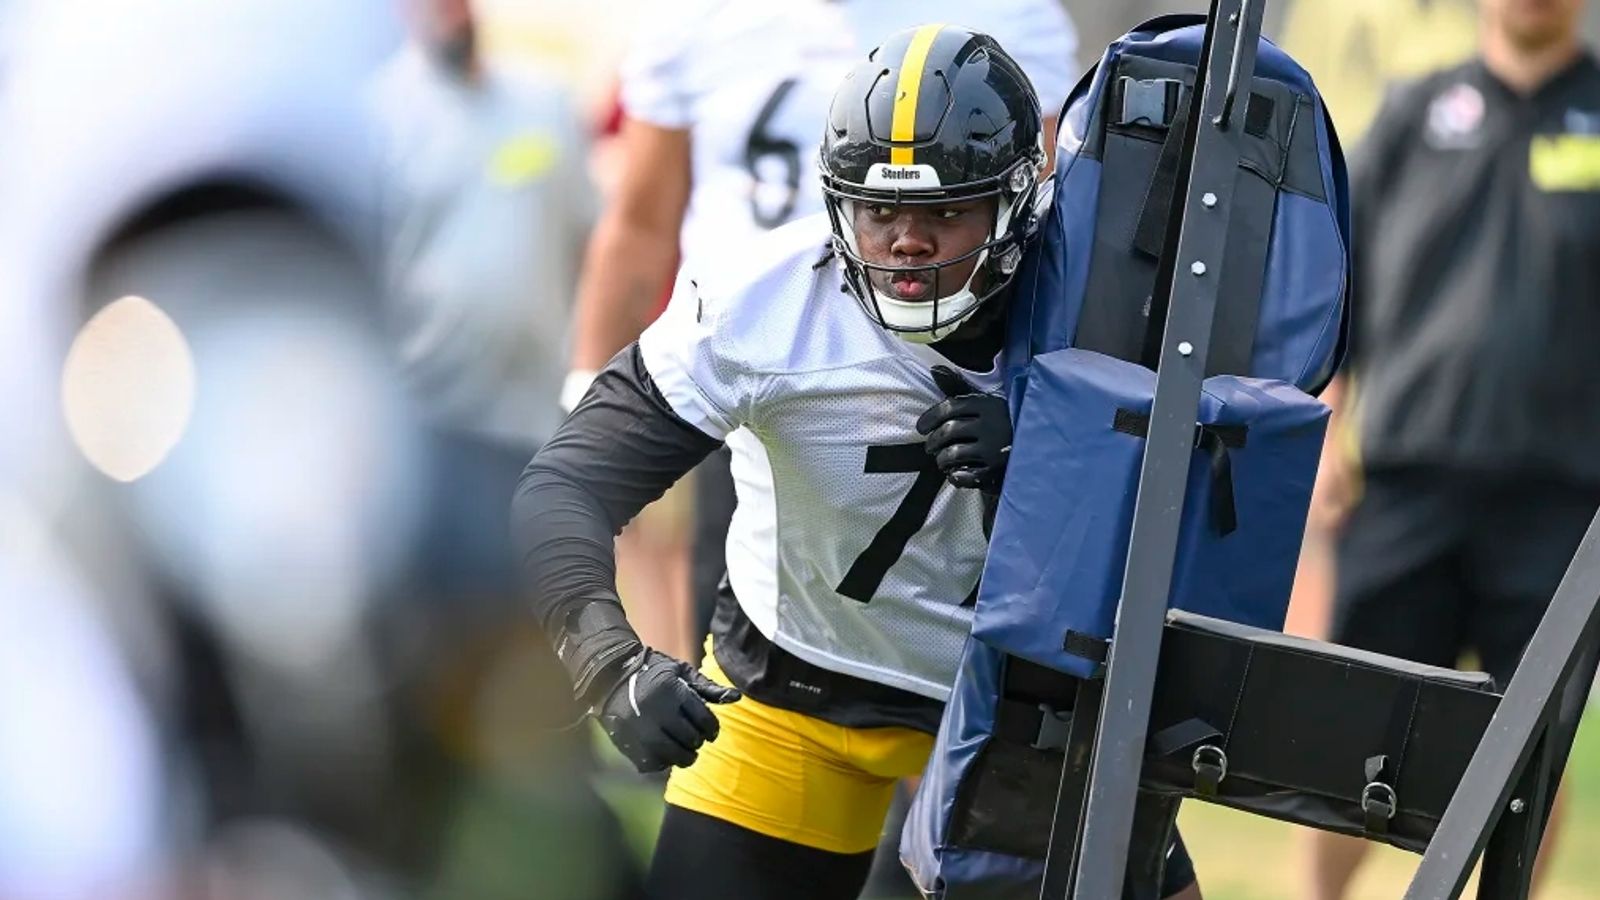 Crisan: Three takeaways from the Steelers' mandatory minicamp